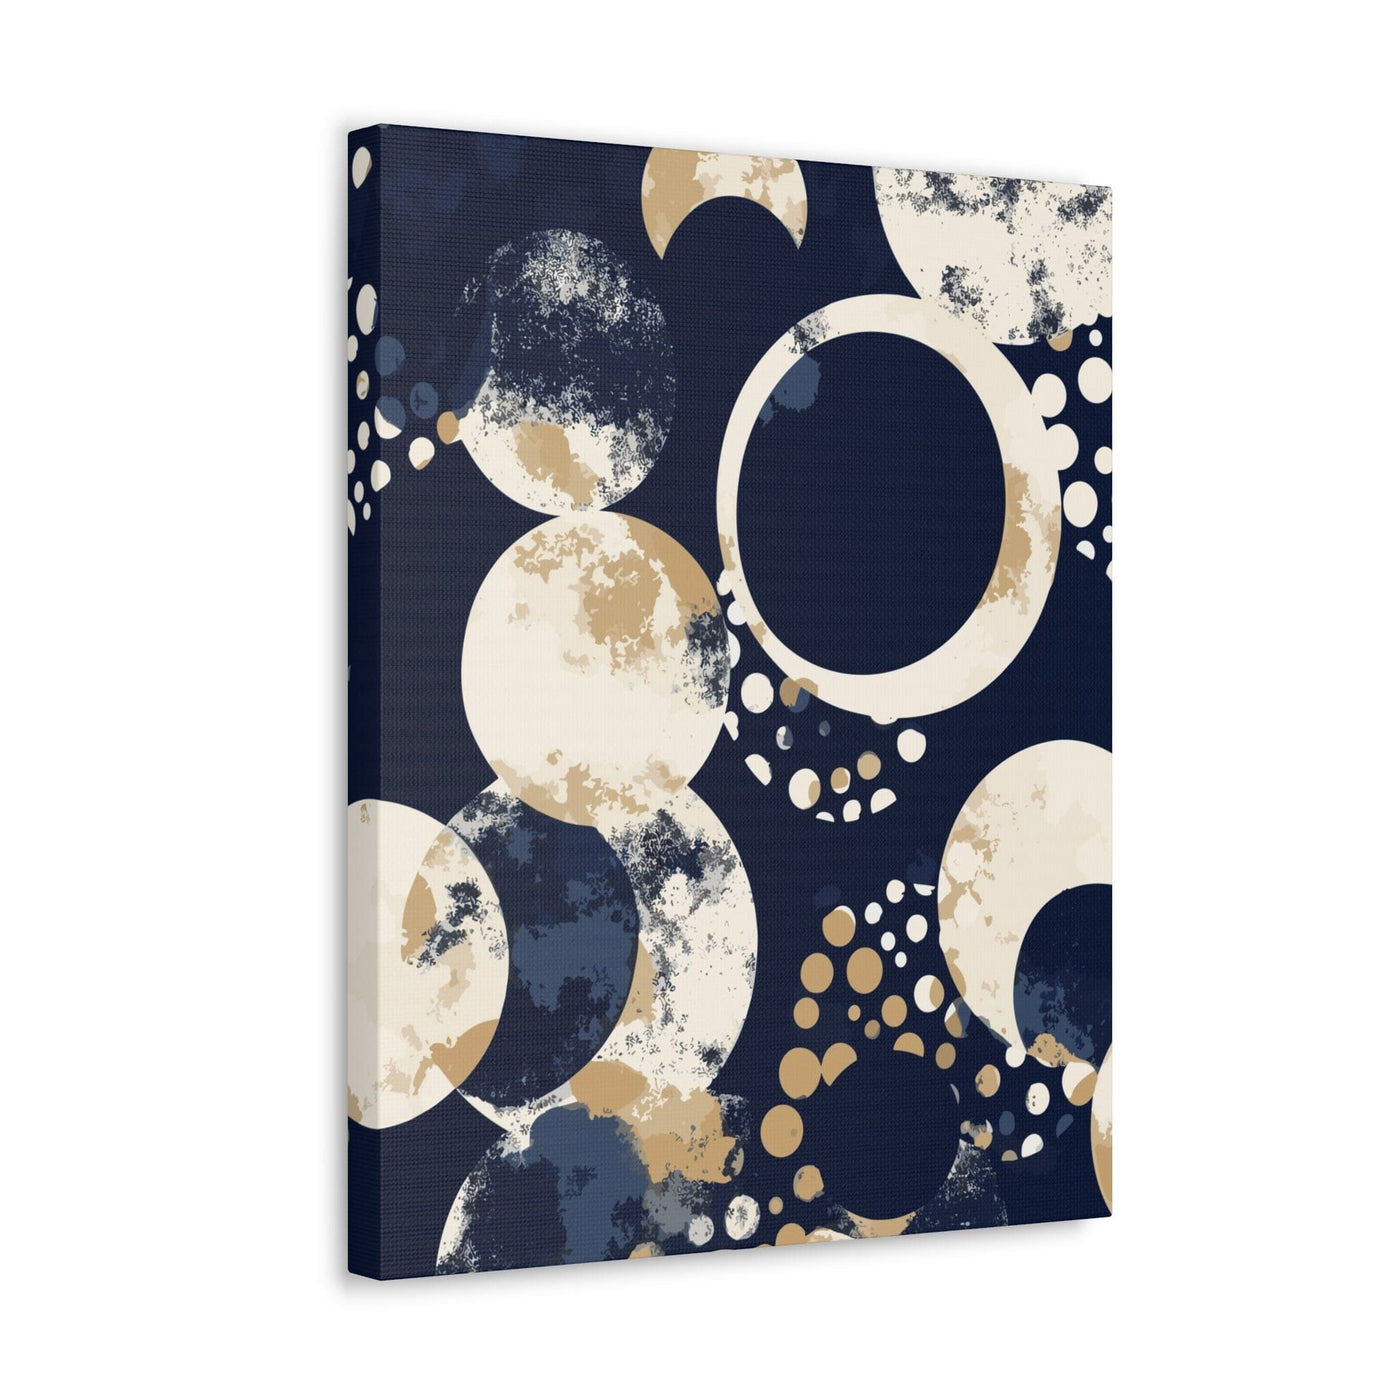 Wall Art Decor Canvas Print Artwork Navy Blue And Beige Spotted Illustration